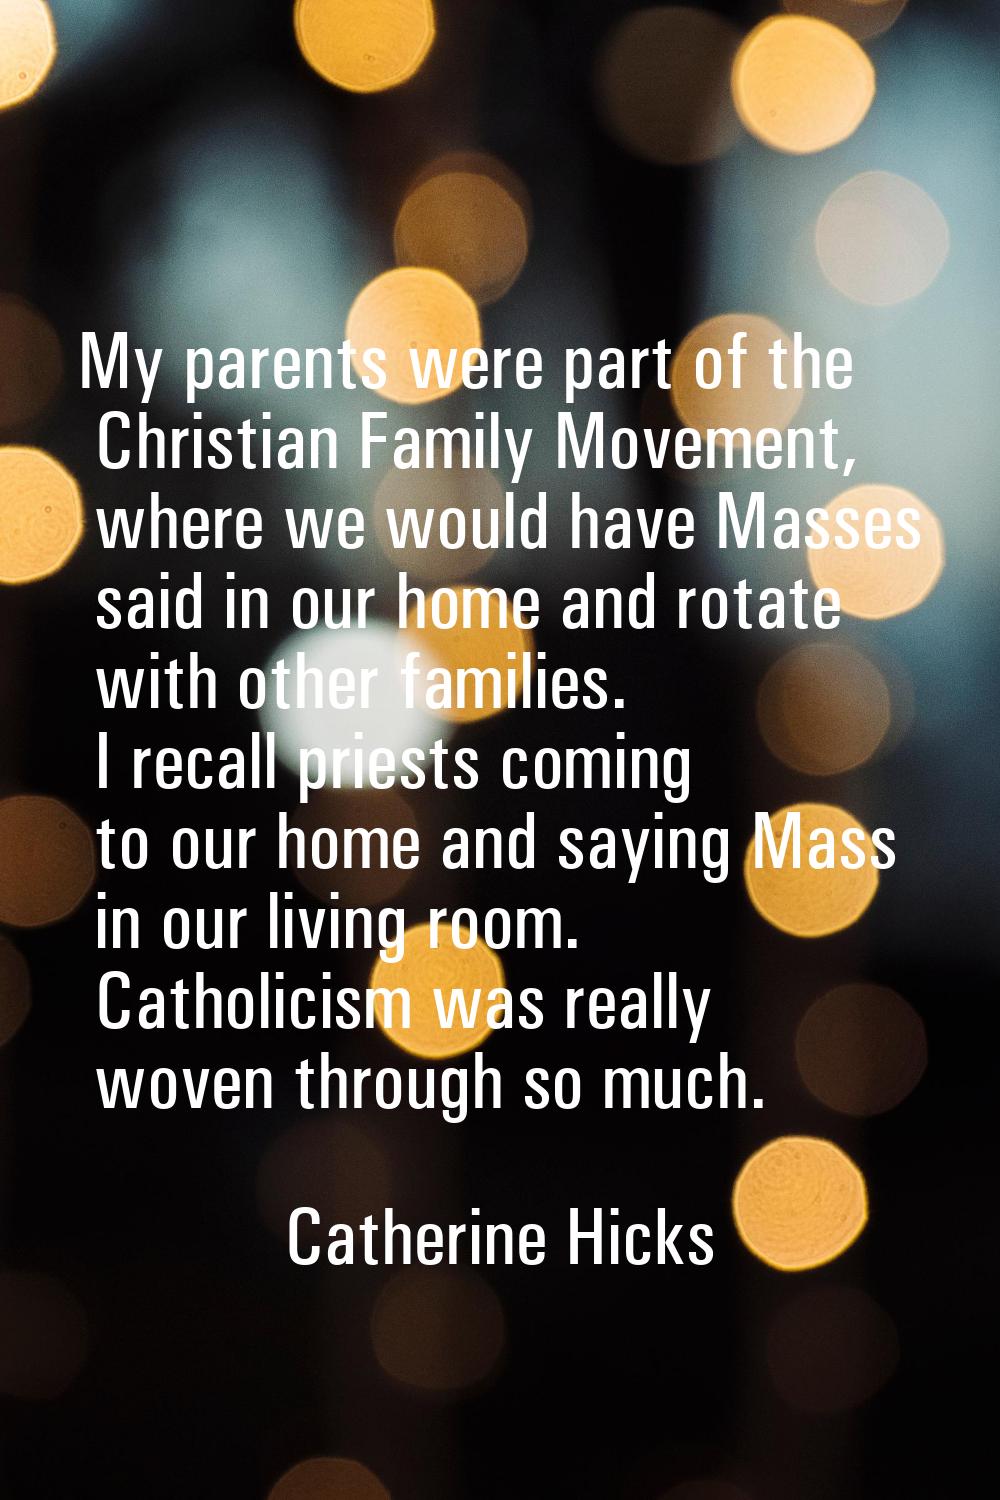 My parents were part of the Christian Family Movement, where we would have Masses said in our home 